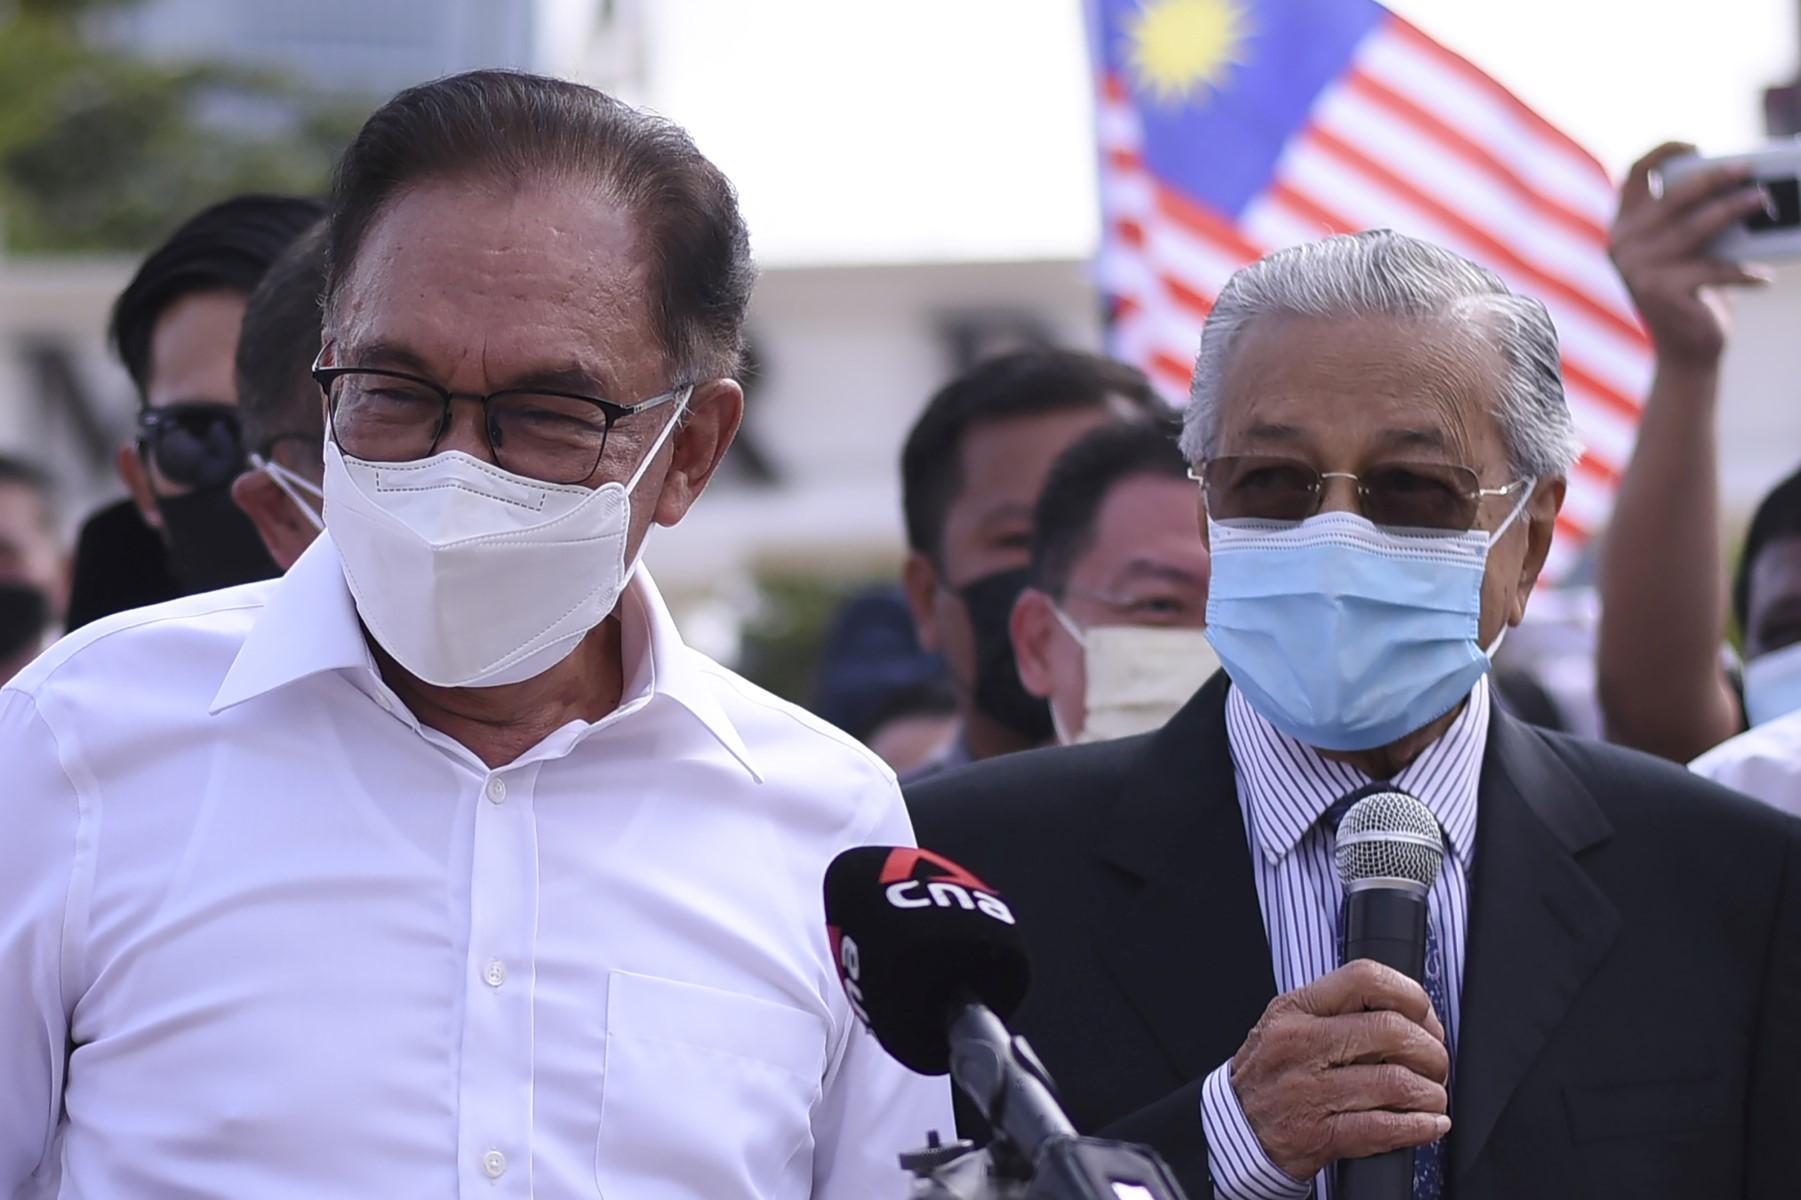 Former prime minister Dr Mahathir Mohamad with PKR president Anwar Ibrahim at a protest against the closure of Parliament in Kuala Lumpur, on this Aug 2, 2021. Photo: AFP